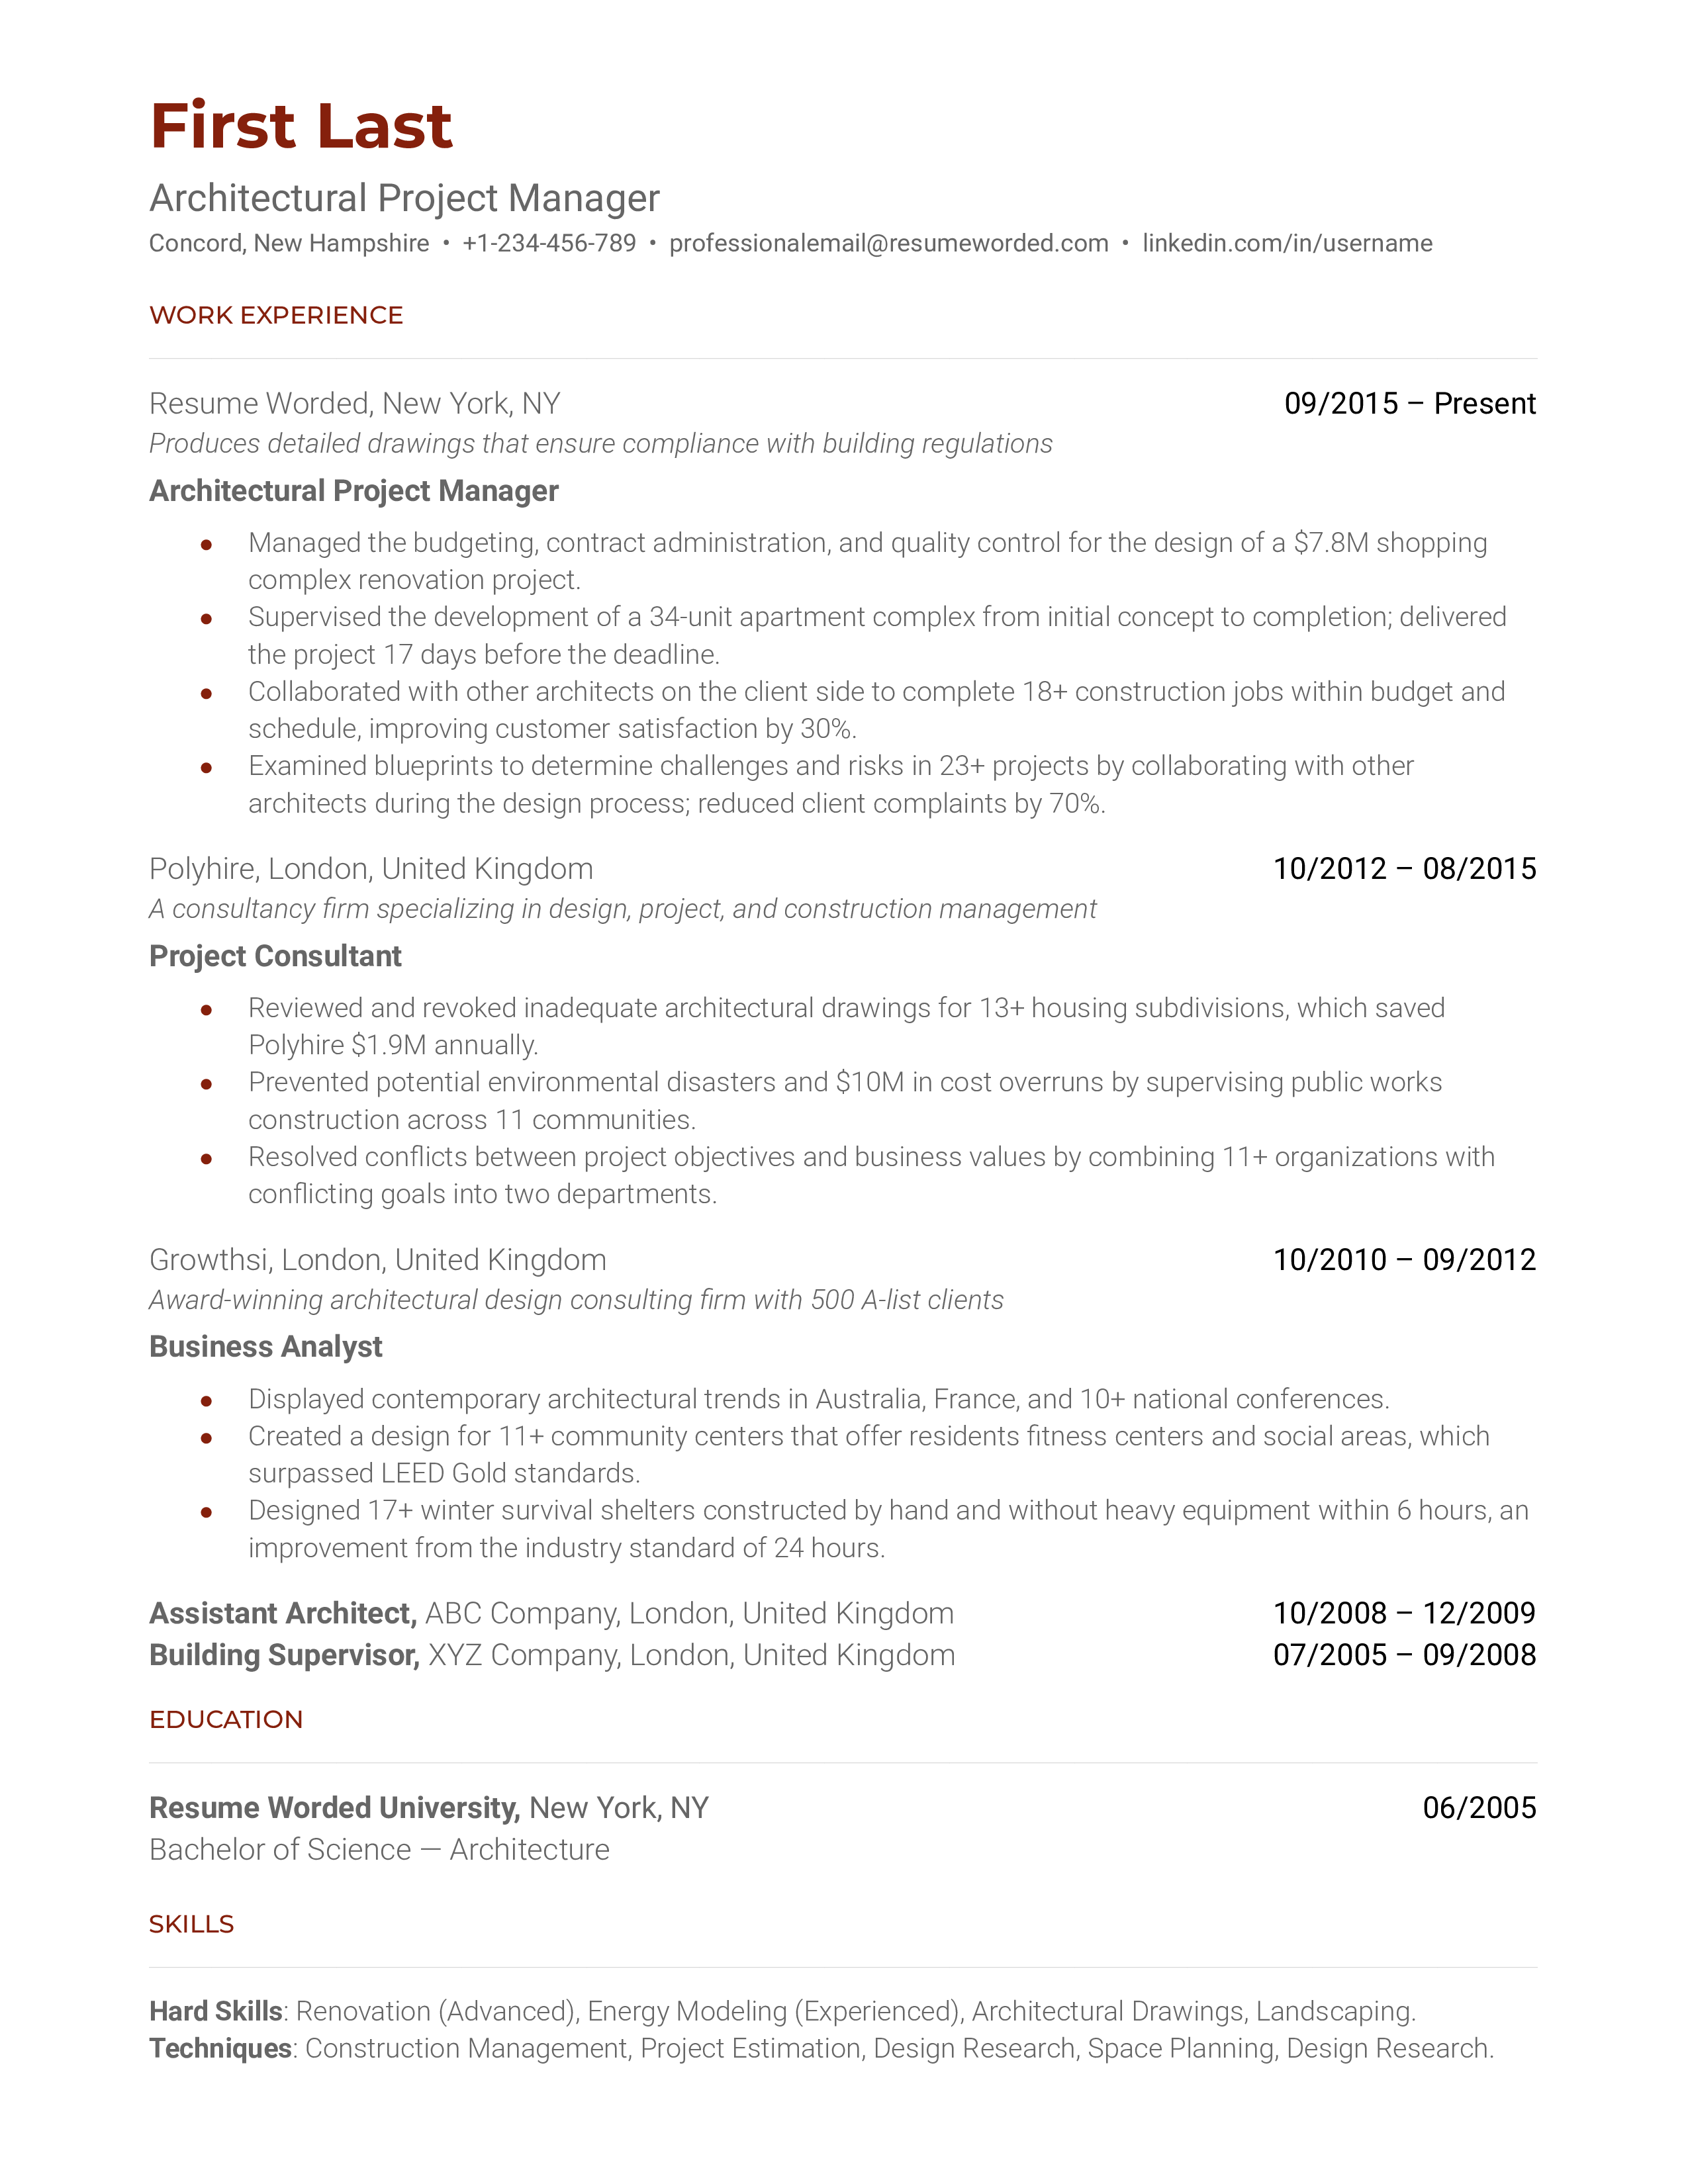 Architectural Project Manager Resume Sample